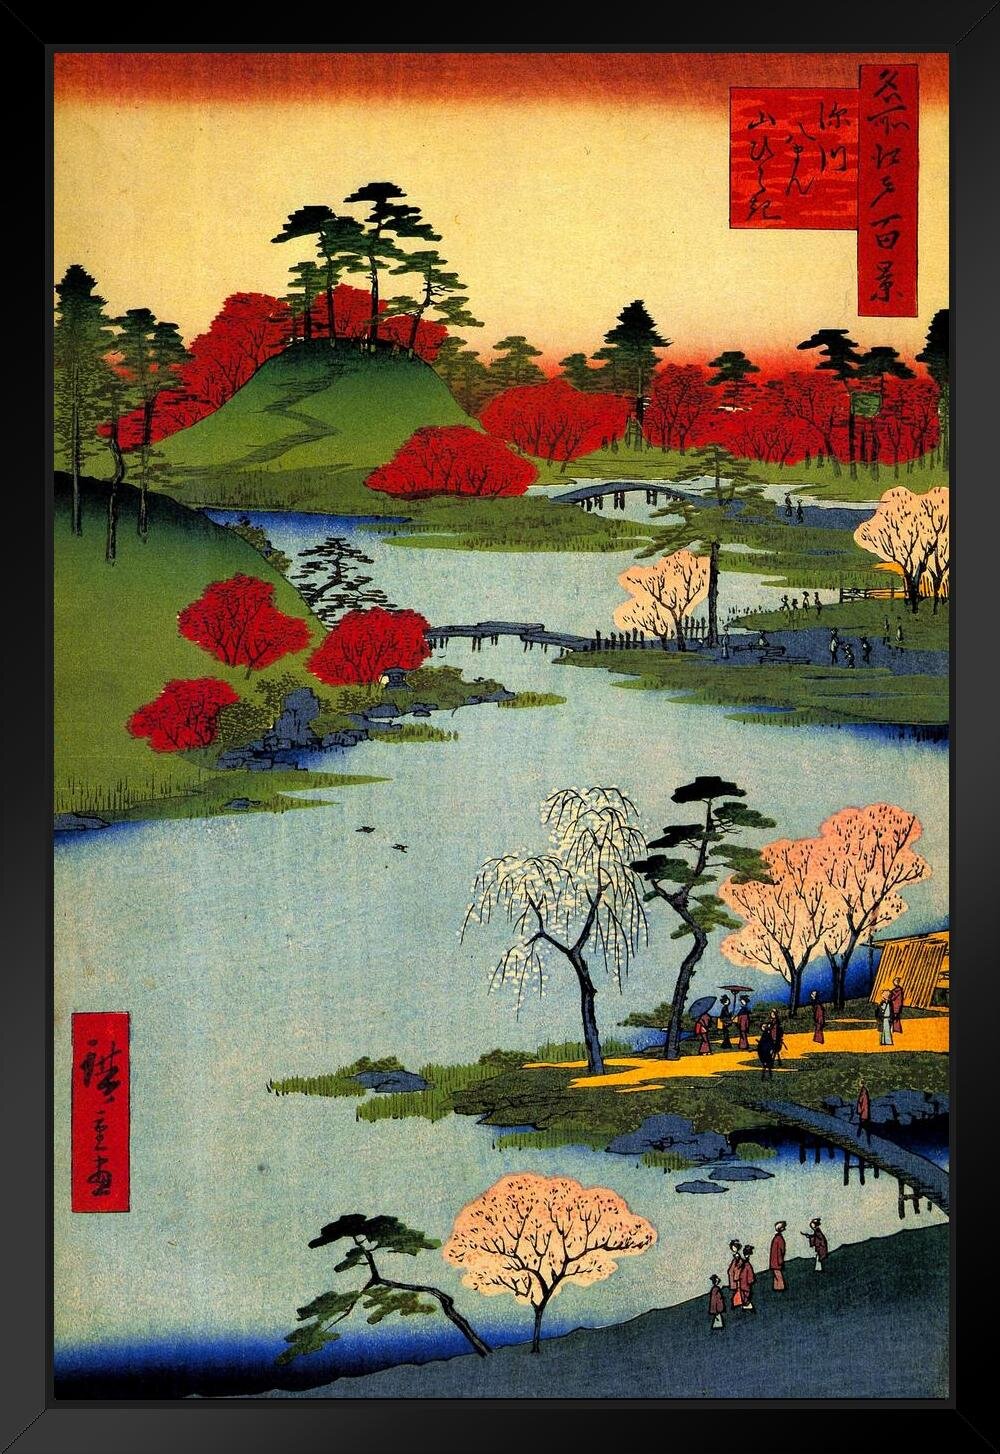 JAPANESE GARDEN RED TREE CANVAS PICTURE PRINT WALL ART HOME DECOR FREE DELIVERY